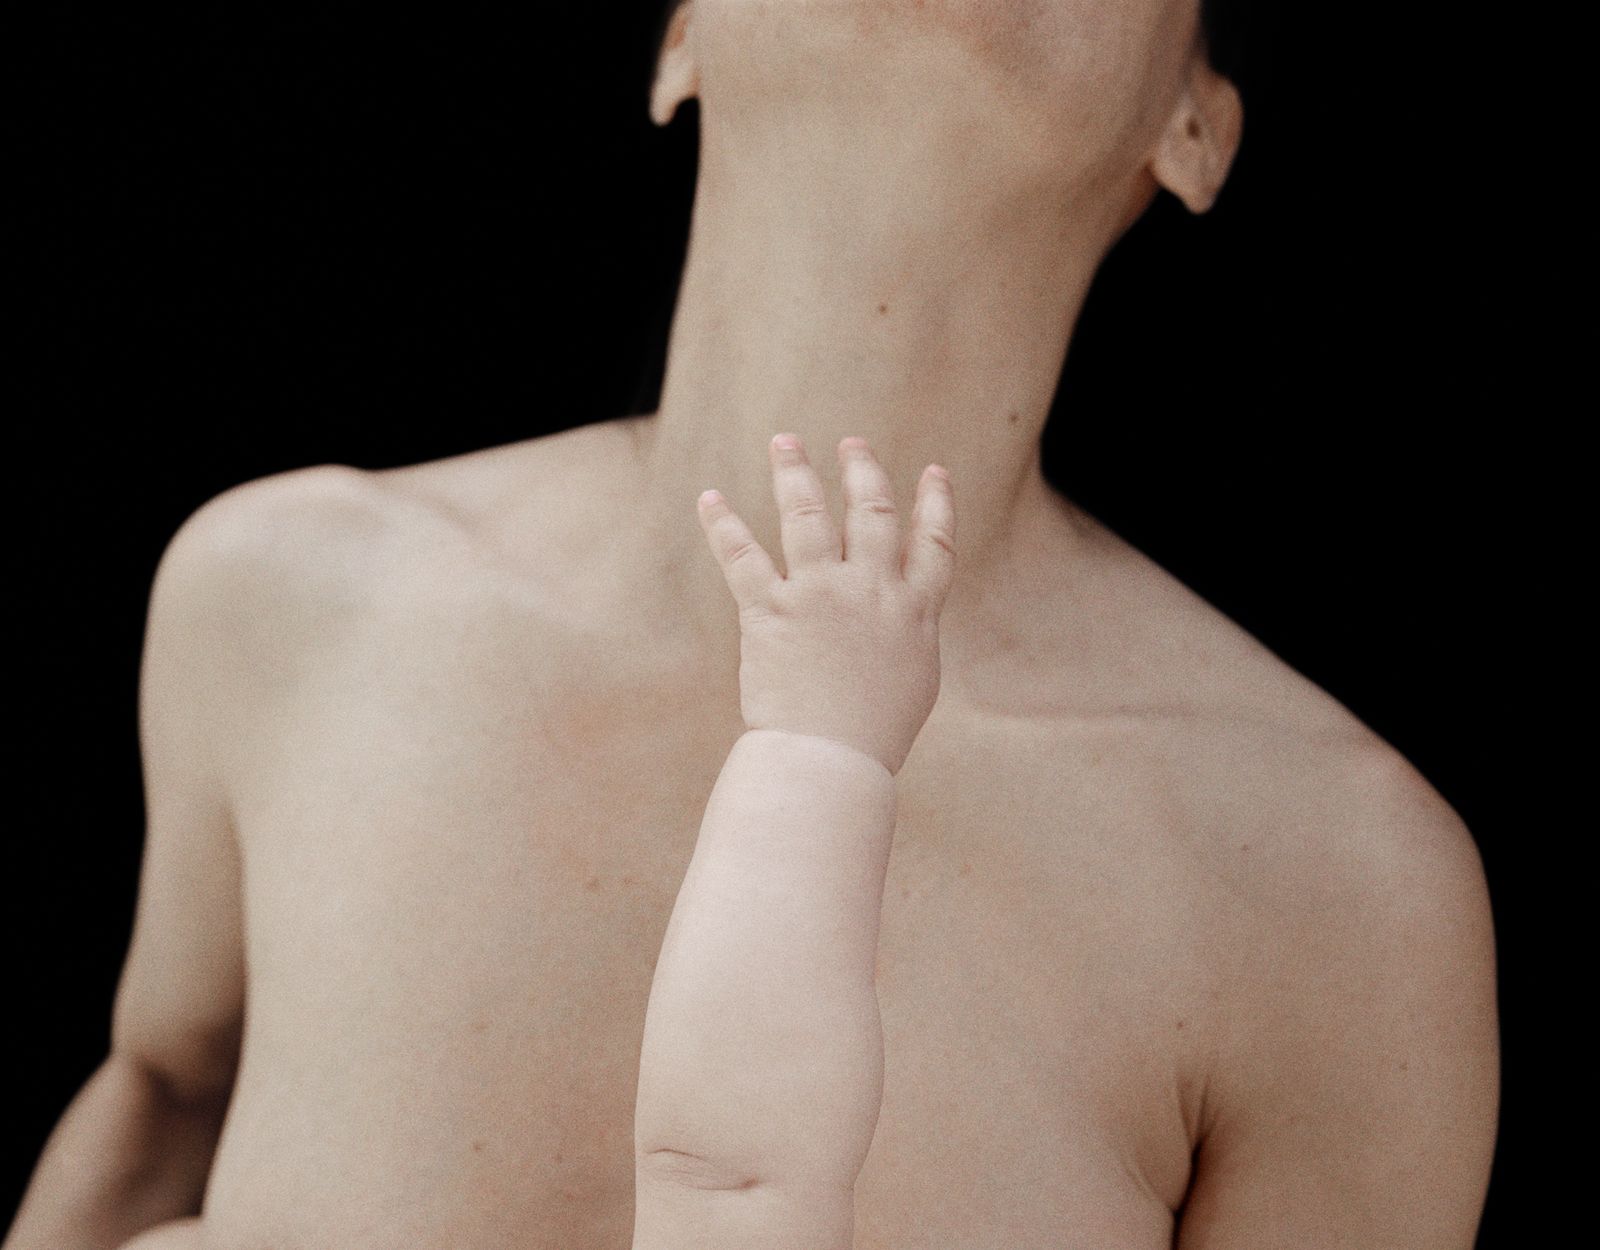 © Sophie Ebrard - Image from the I DIDN'T WANT TO BE A MUM photography project